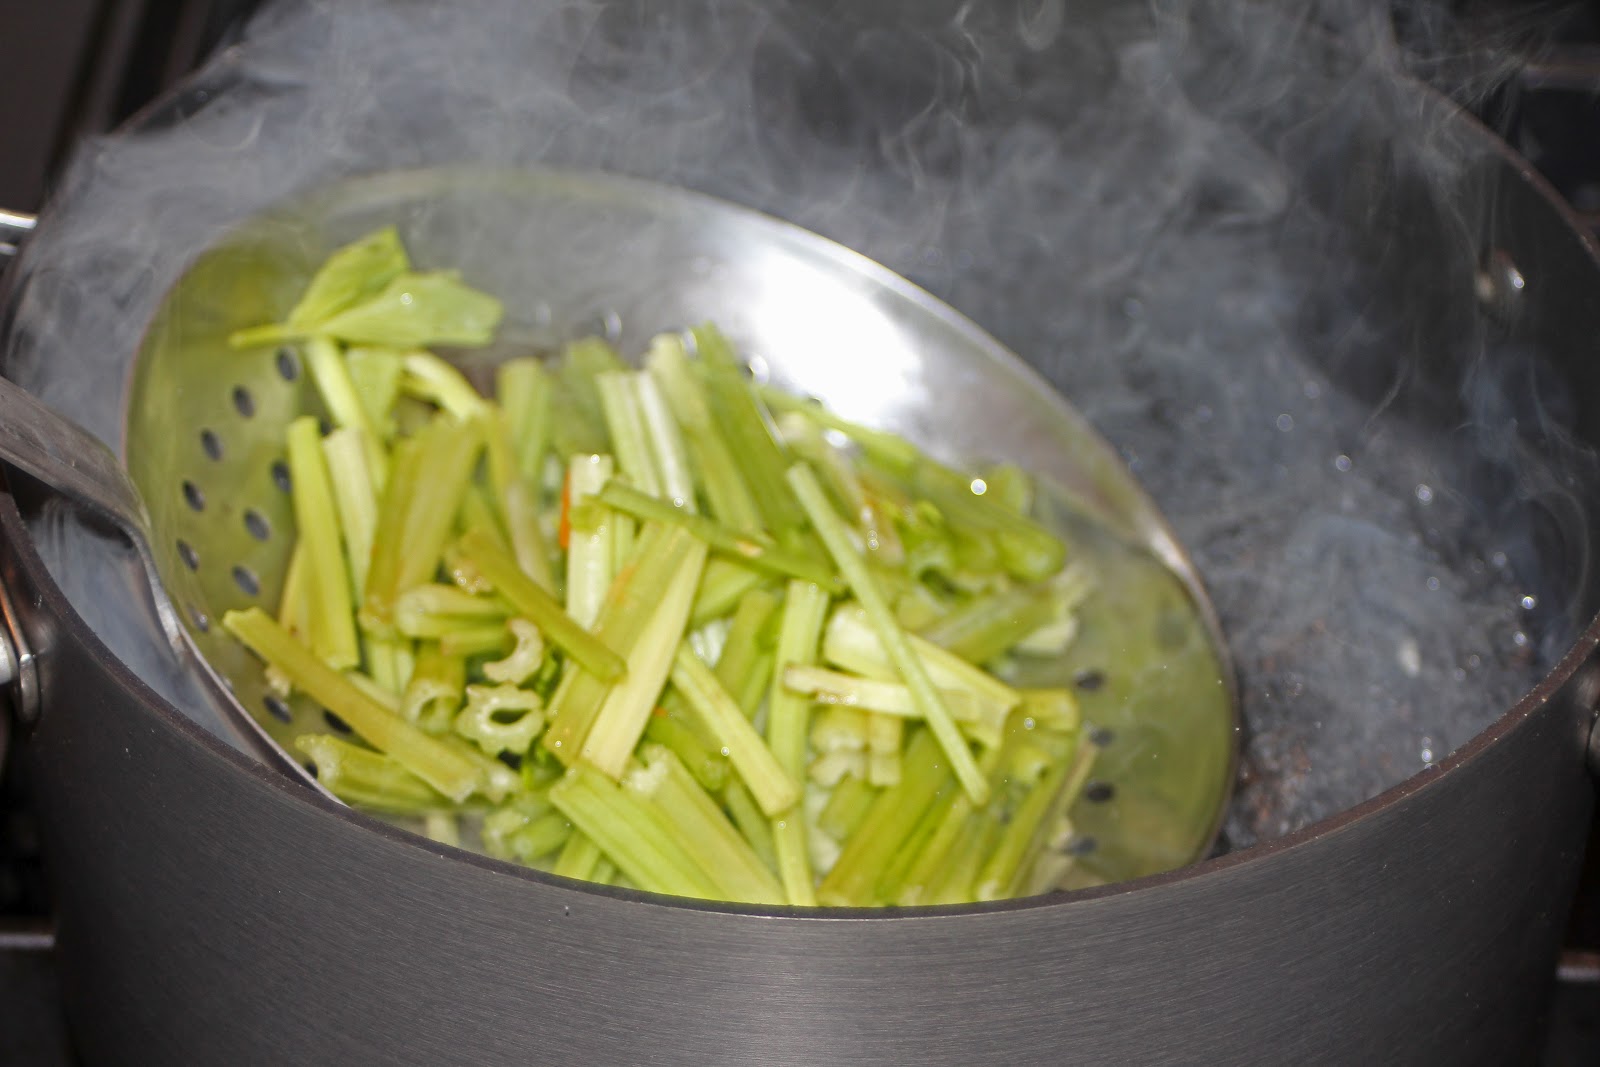 Blanch the celery in boiling water for 10 seconds.